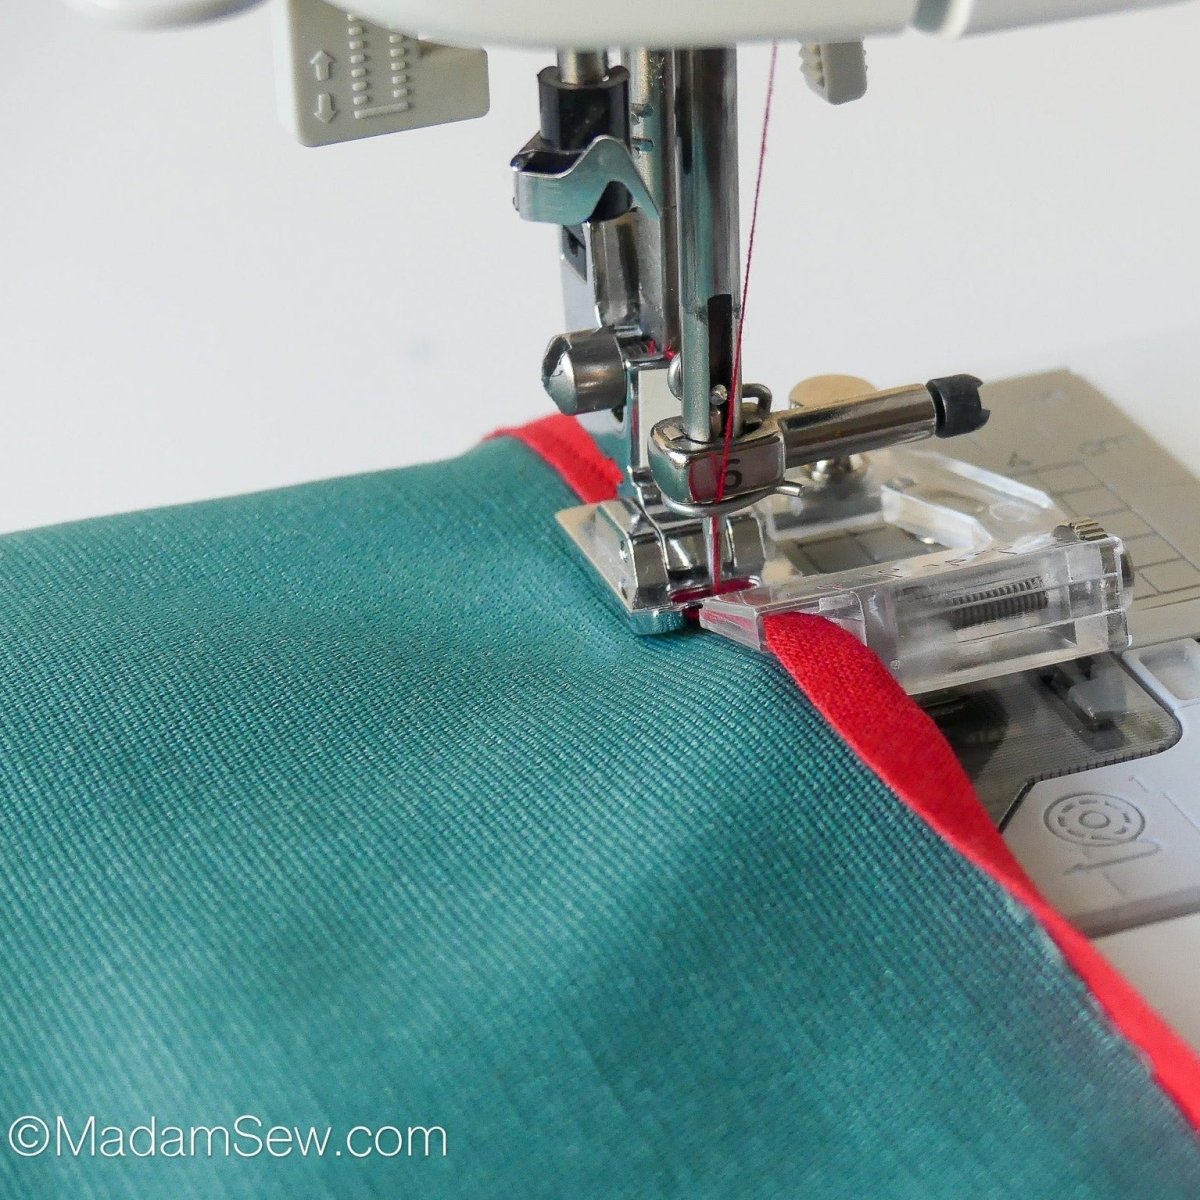 Using the Binder Foot that is included in the 16pc Bias Tape Maker Set to attach bias tape to an item.